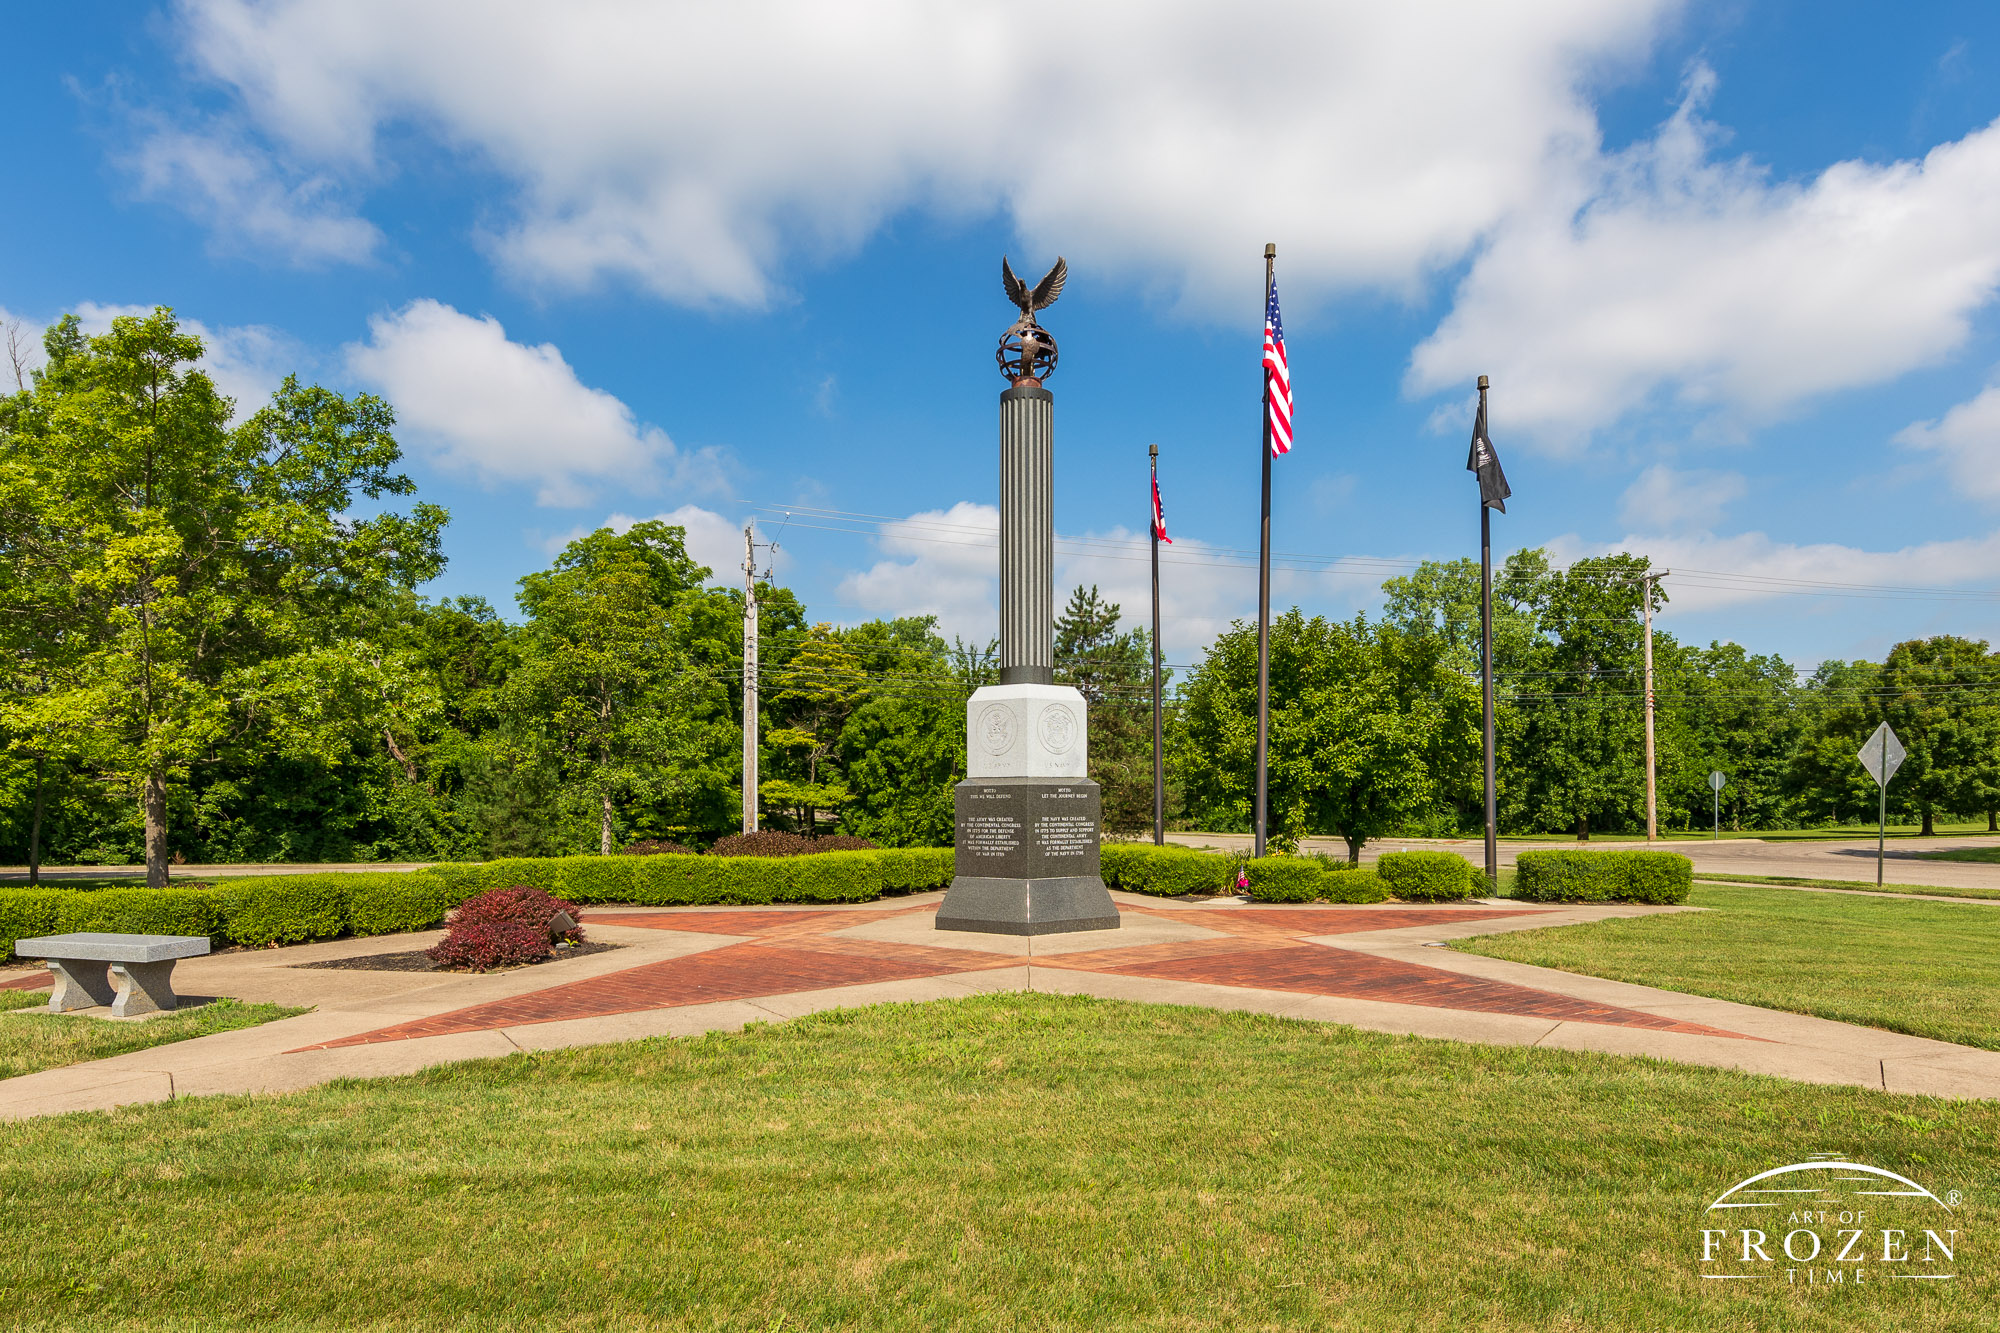 The Beavercreek Veterans Memorial on a sunny day with puffy clouds which honors local veterans from each of the five services